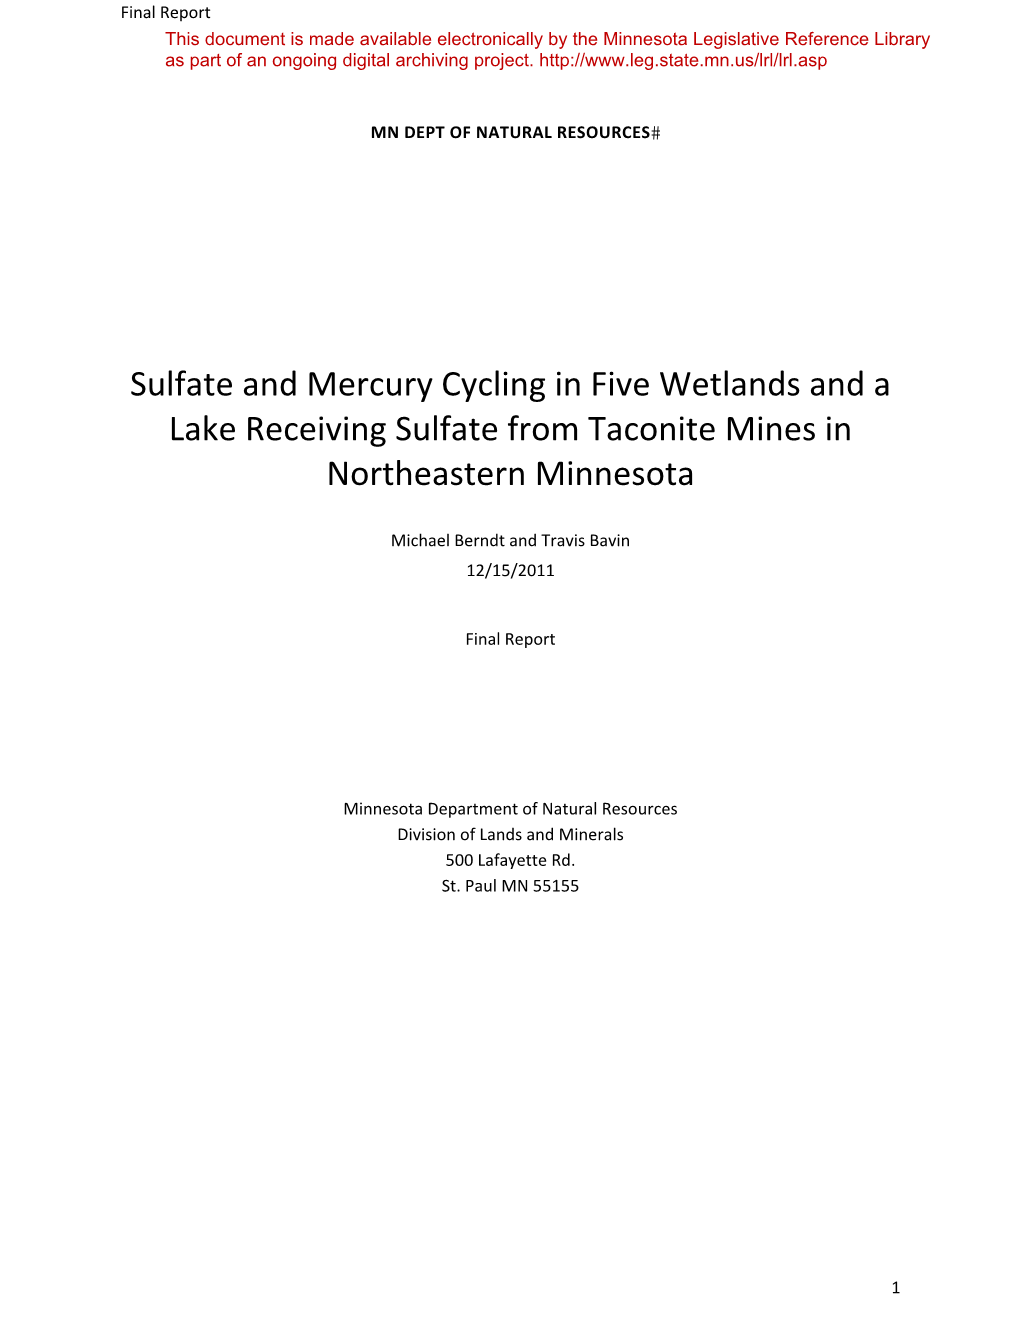 Sulfate and Mercury Cycling in Five Wetlands and a Lake Receiving Sulfate from Taconite Mines in Northeastern Minnesota